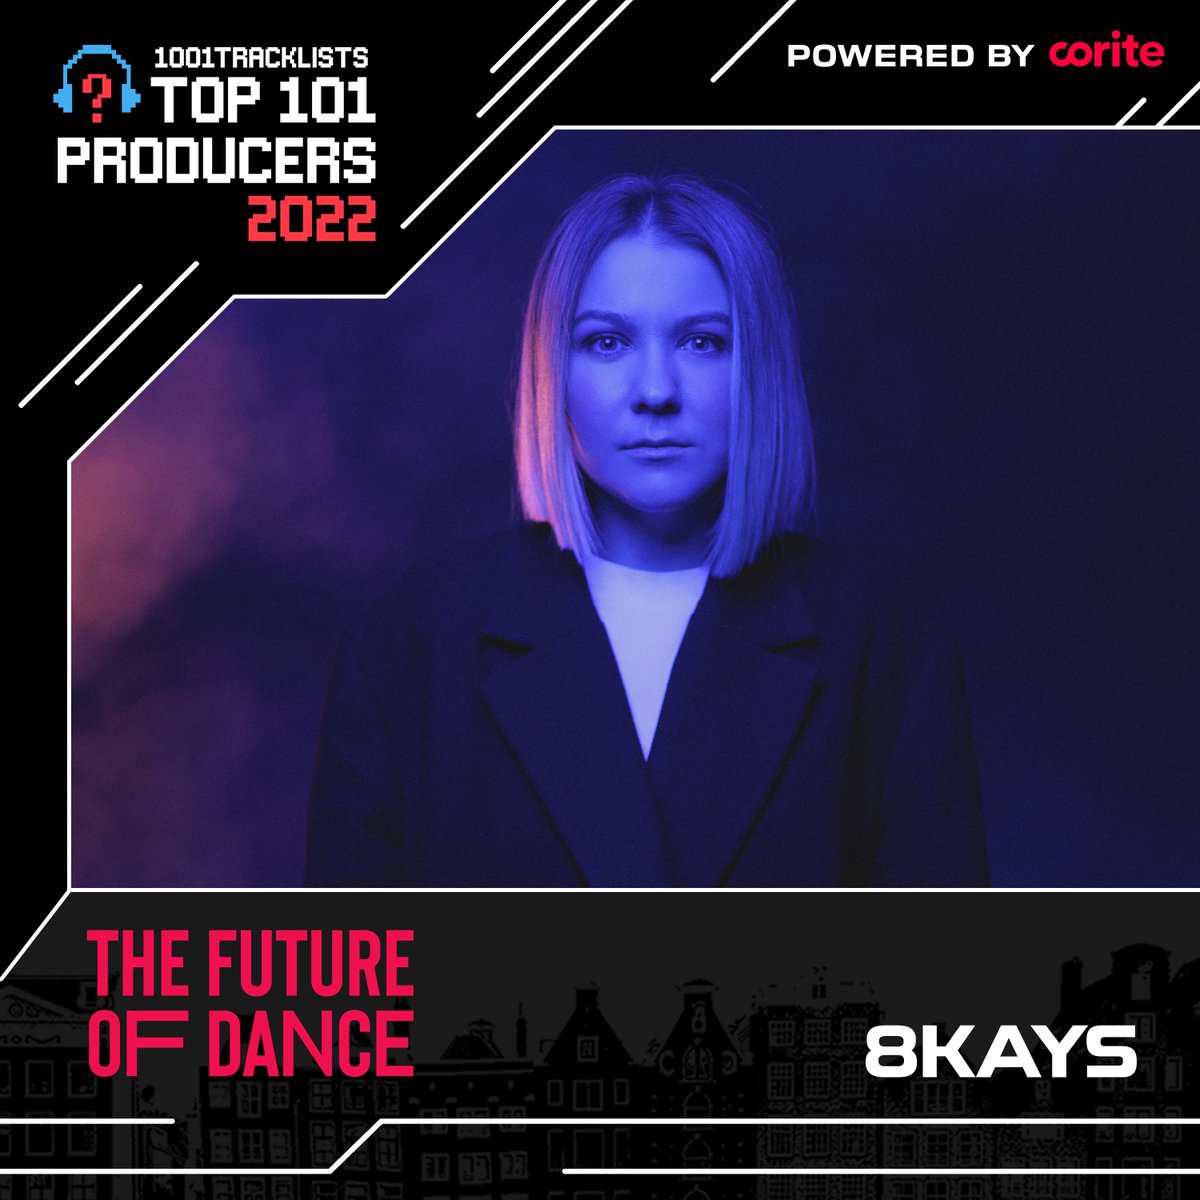 Ukrainian producer @8Kays_official has become a key figure on @afterlife_ofc with both her releases and live sets at Afterlife events. #TheFutureOfDance2022 #Top101Producers2022